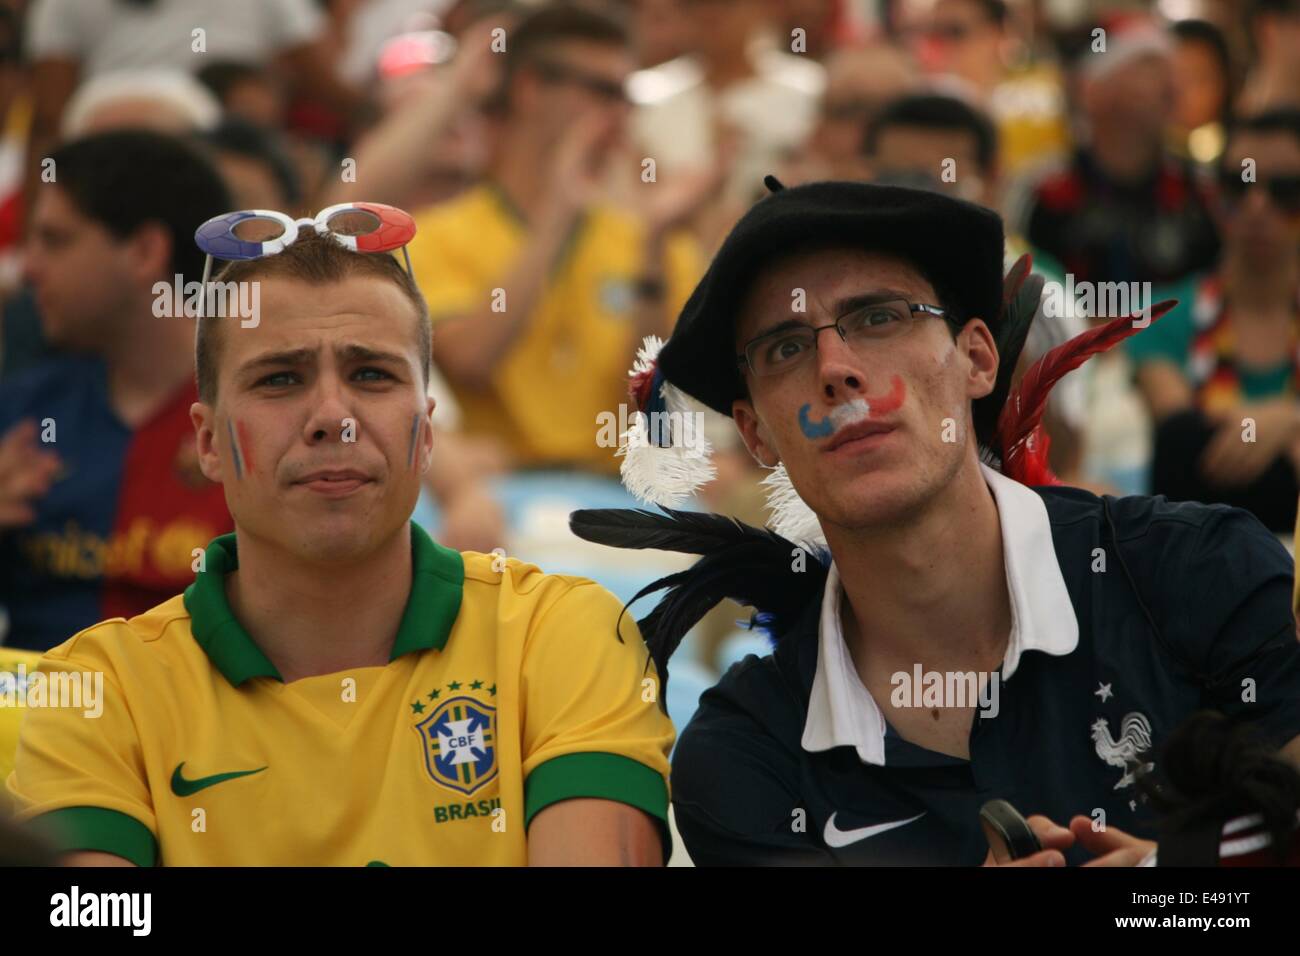 2014 FIFA World Cup Brazil. French fans at Maracanã in the quarterfinals match against Germany, who won 1-0. Rio de Janeiro, Brazil, 4th July, 2014. Stock Photo